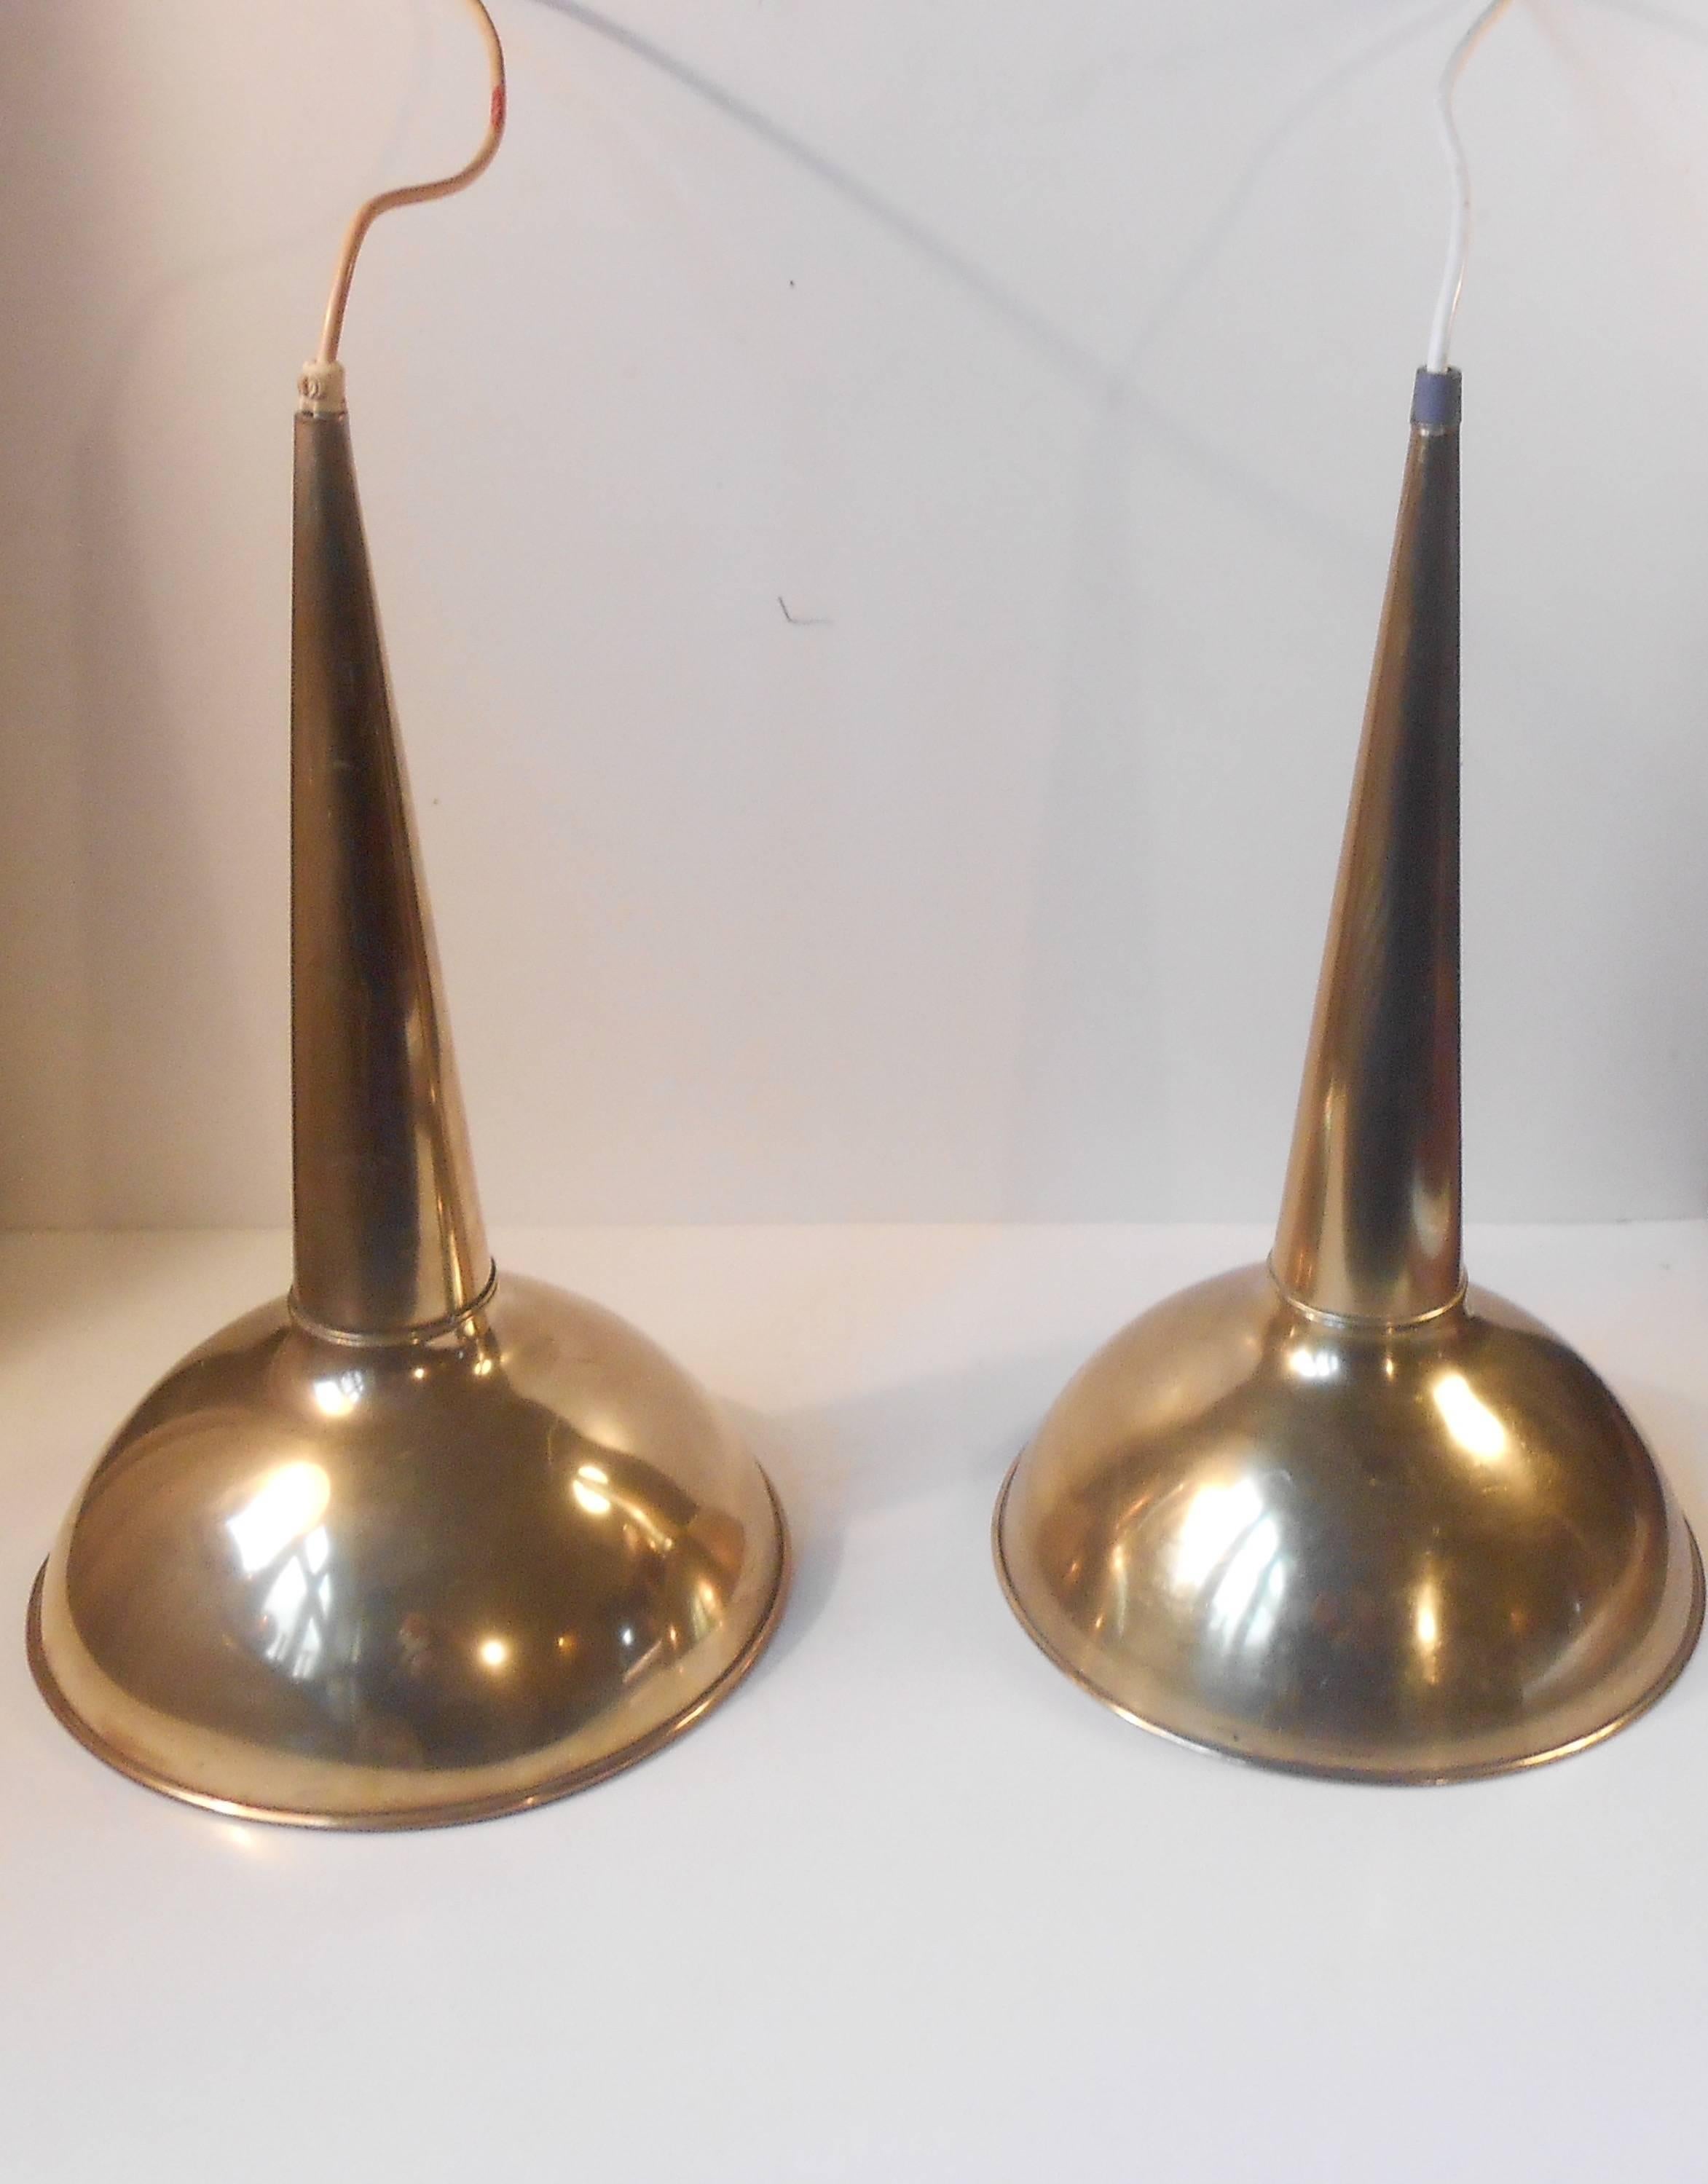 Monumental and rare pair of trumpet-shaped pendant lights by anonymous scandinavian maker/designer, circa 1960. Composed of solid polished brass these lights demands attention. Measurements: D 10 inches (25 cm), H 17 inches (43 cm). They will be